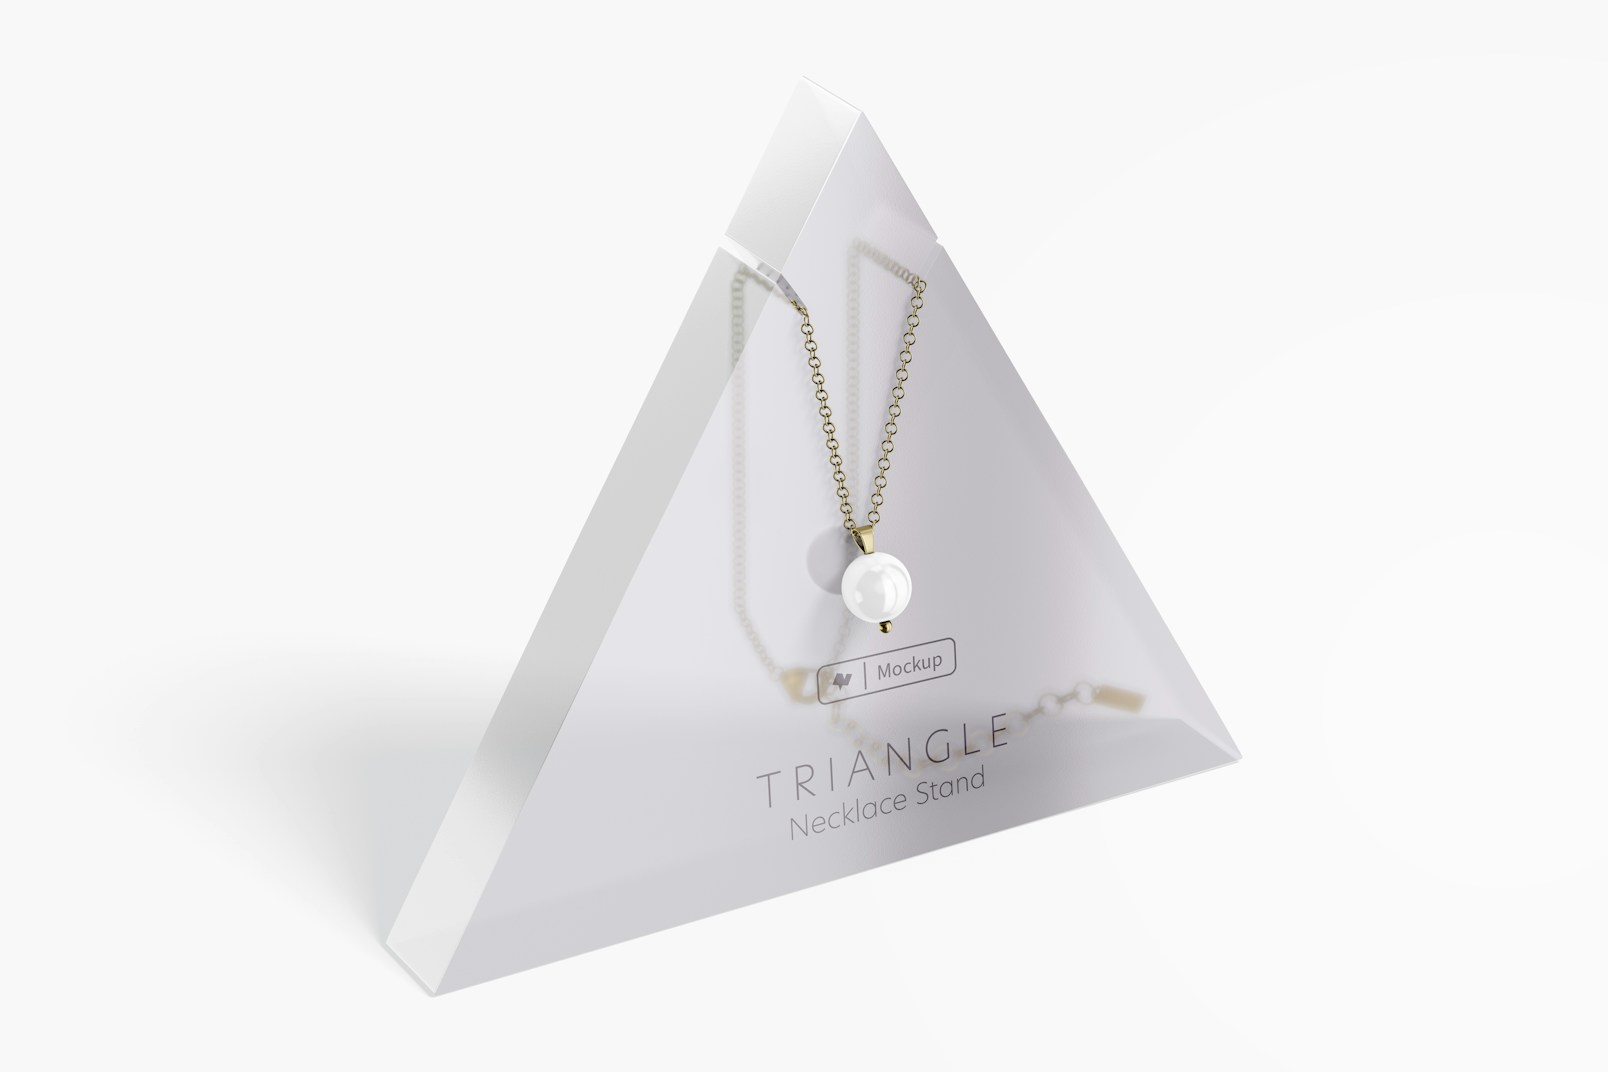 Triangle Necklace Display Stand Mockup, Left View